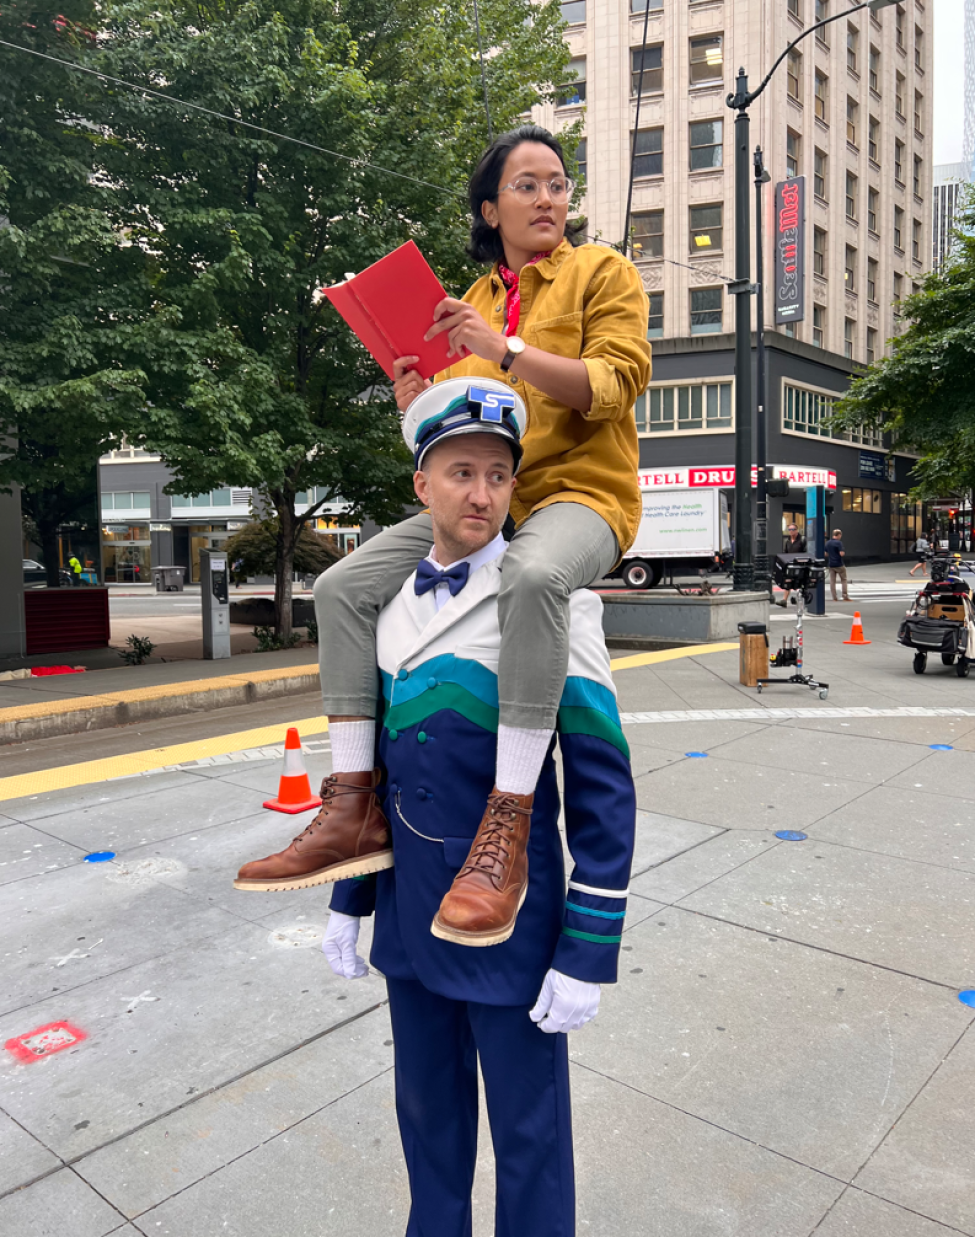 An actor in an orange jacket sits on the shoulders of the Sound Transit conductor character, who is wearing blue, green, white and a hat.